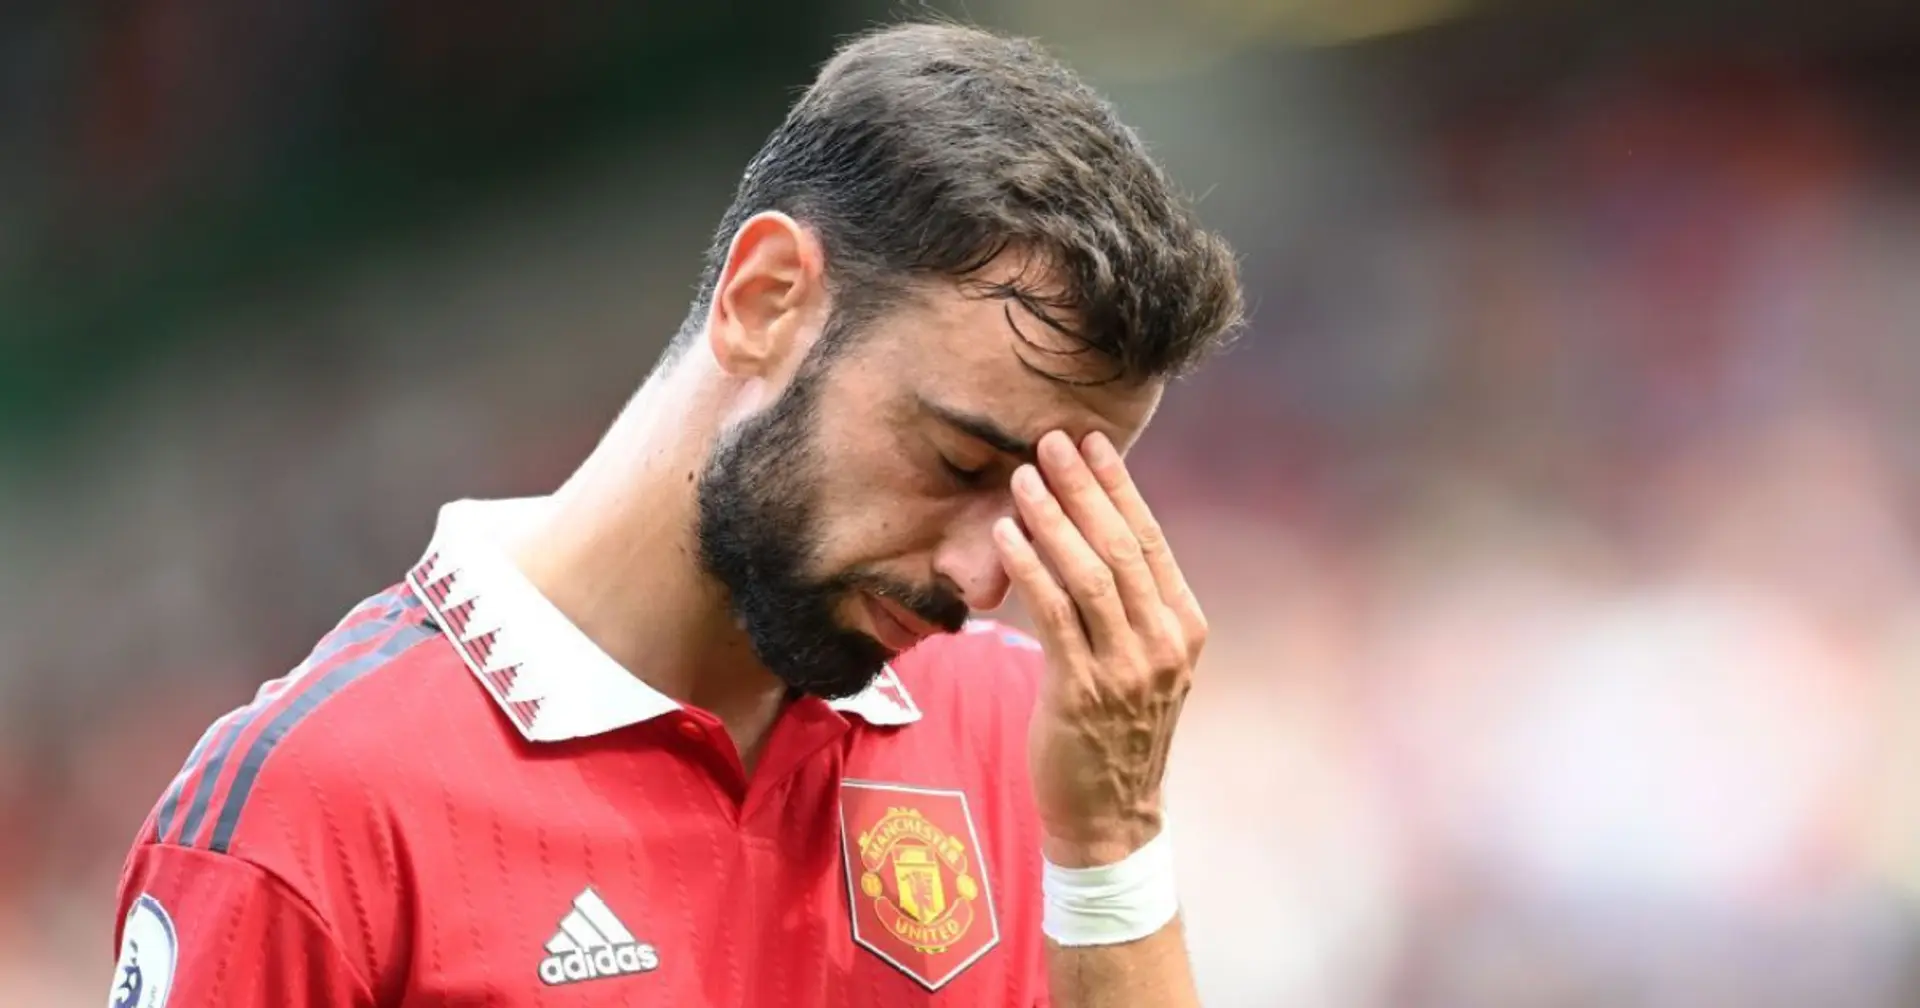 'Nothing about his game that suggests he can be a system player': Man United fans question Bruno Fernandes